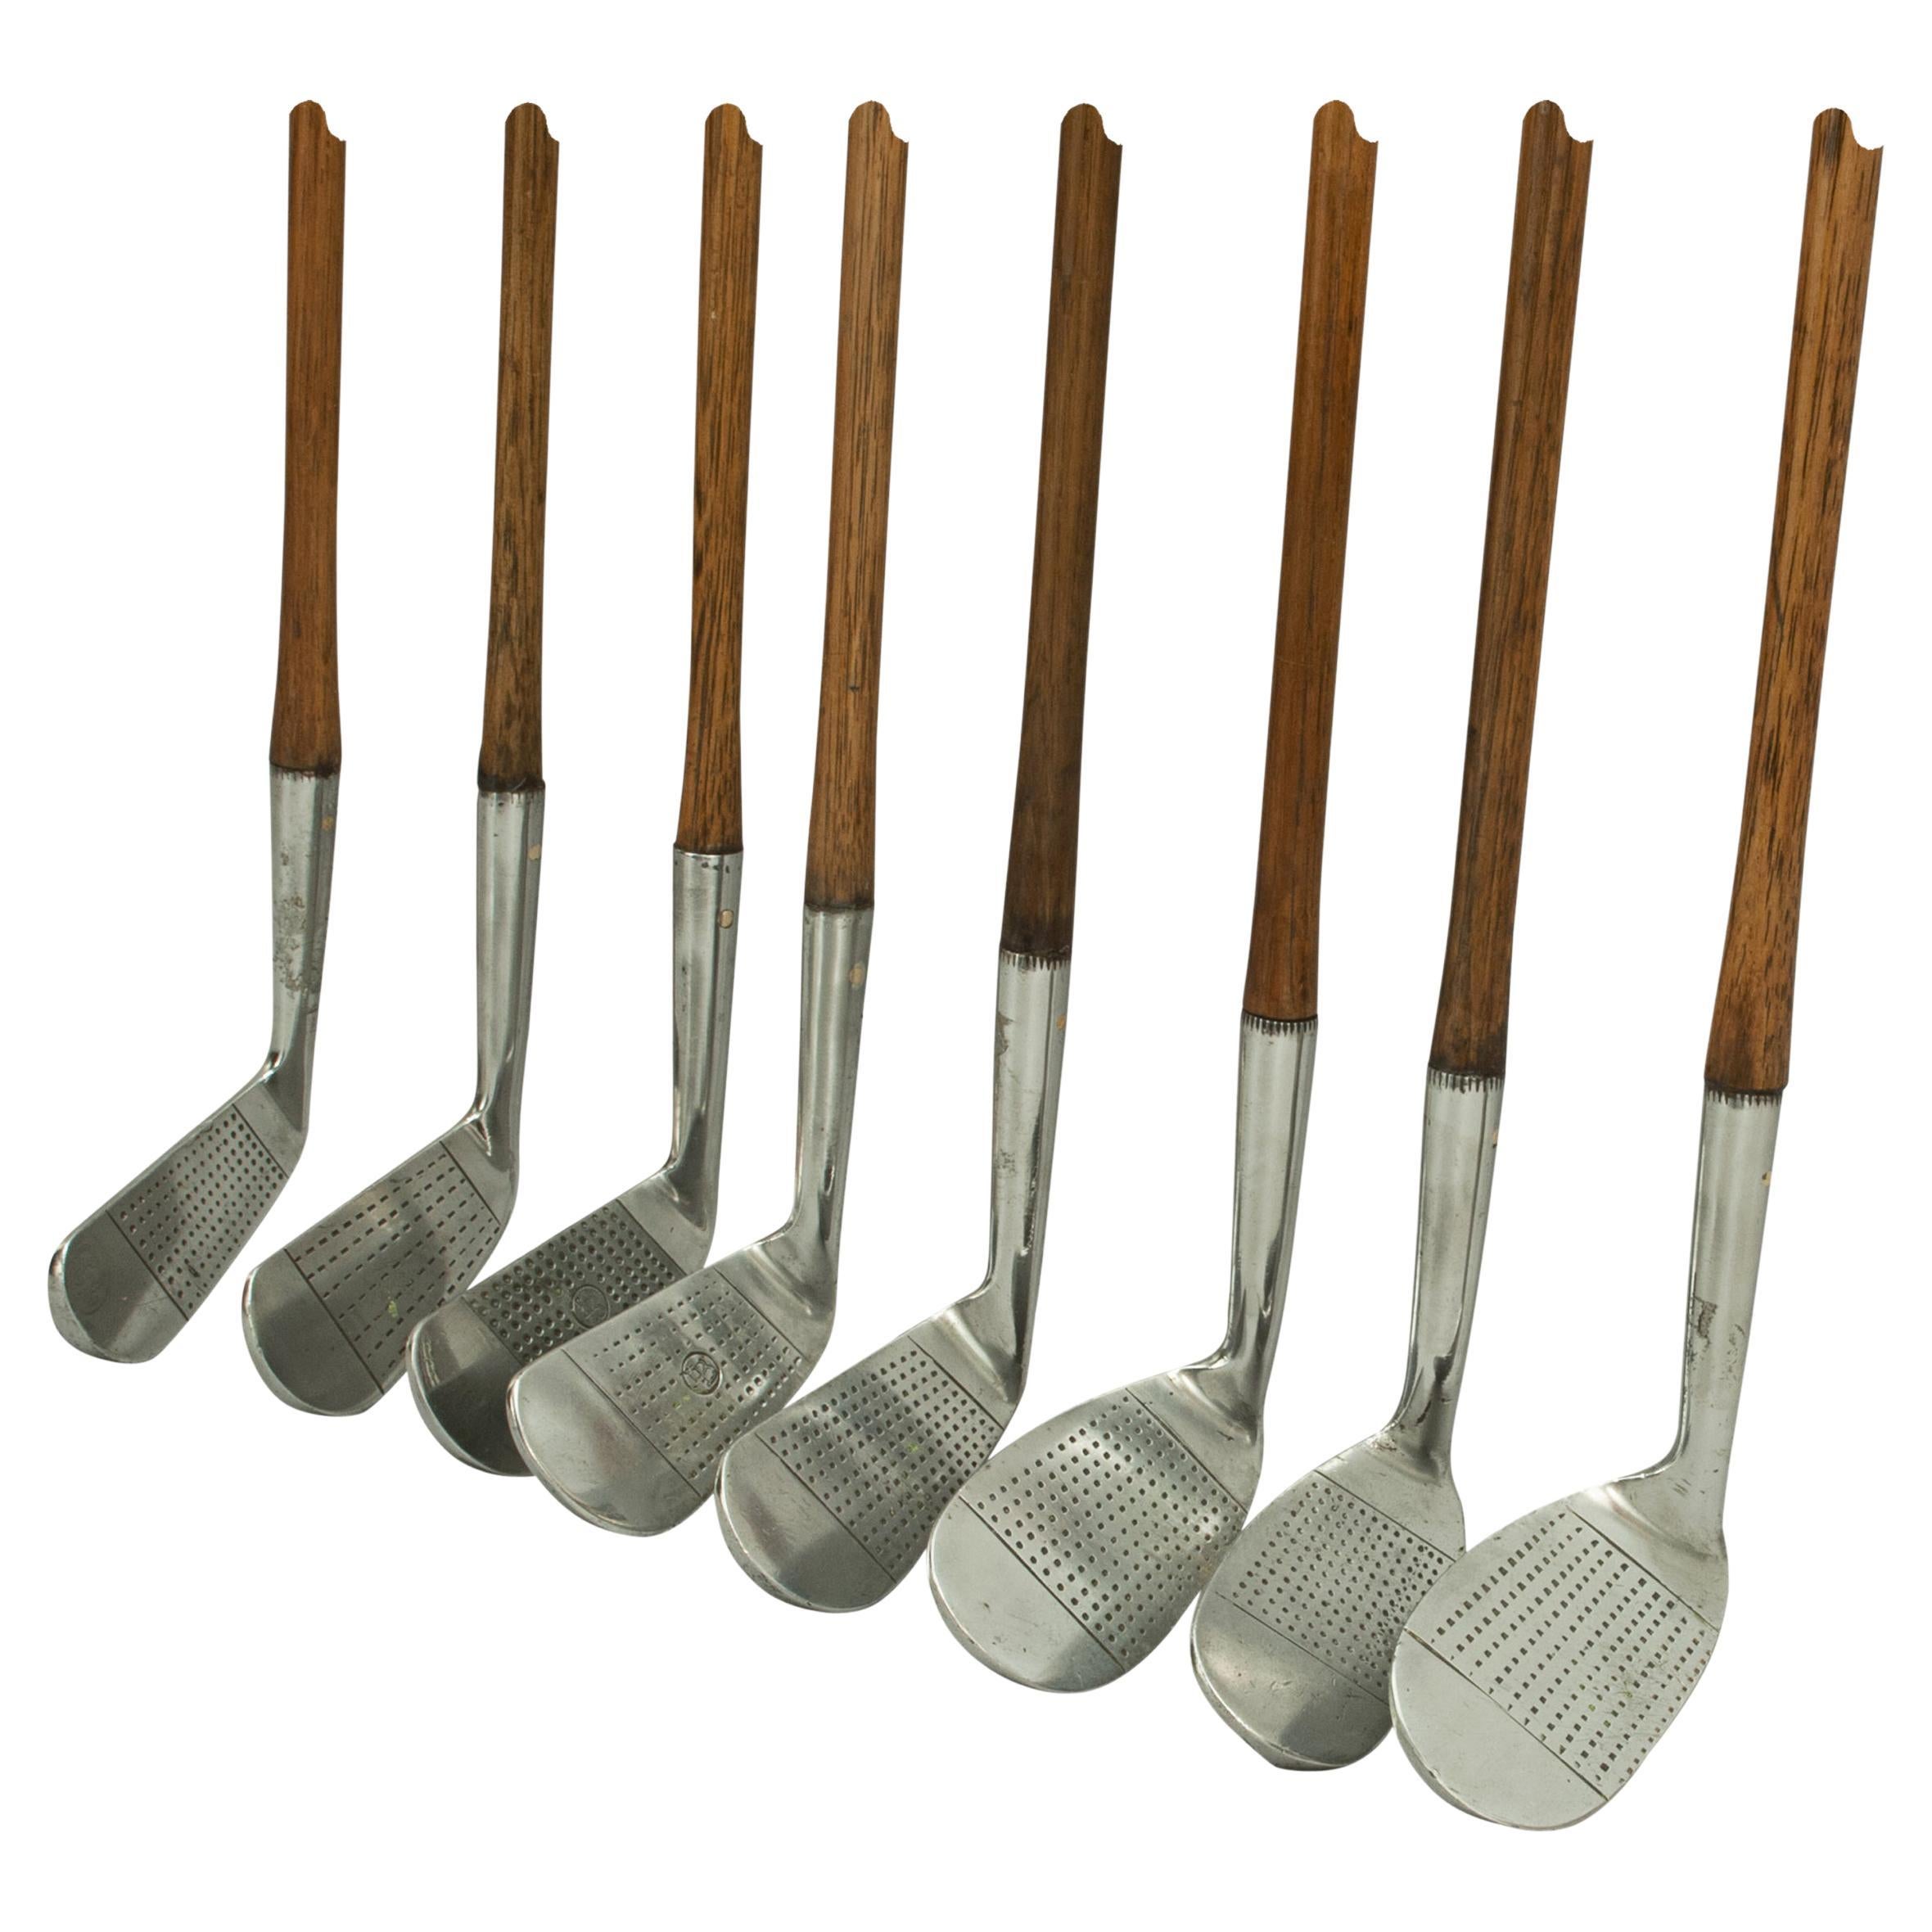 Set of Playable Hickory Golf Clubs